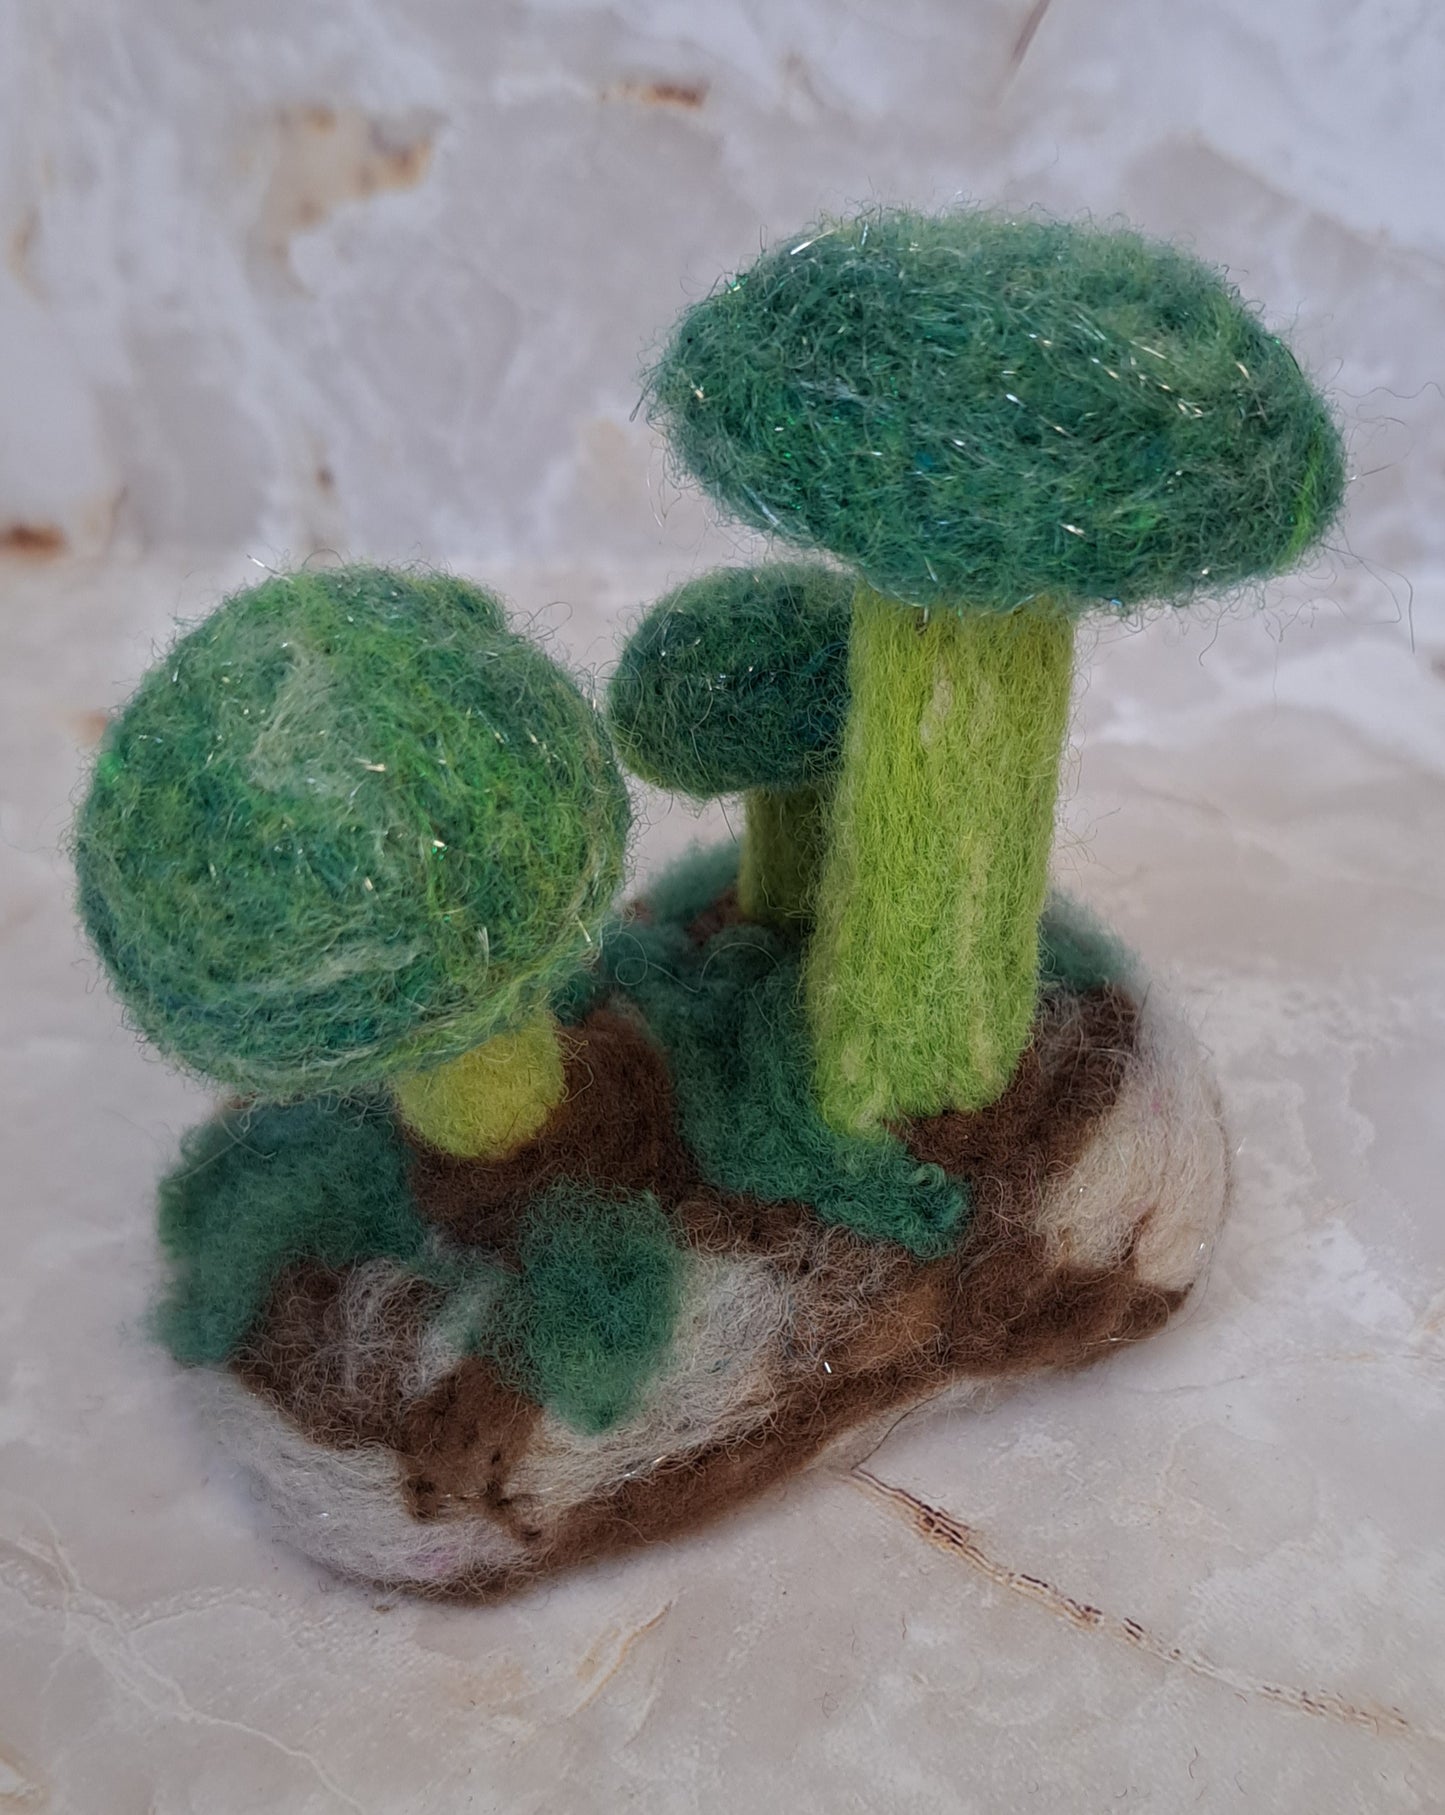 Green Shroomscapes